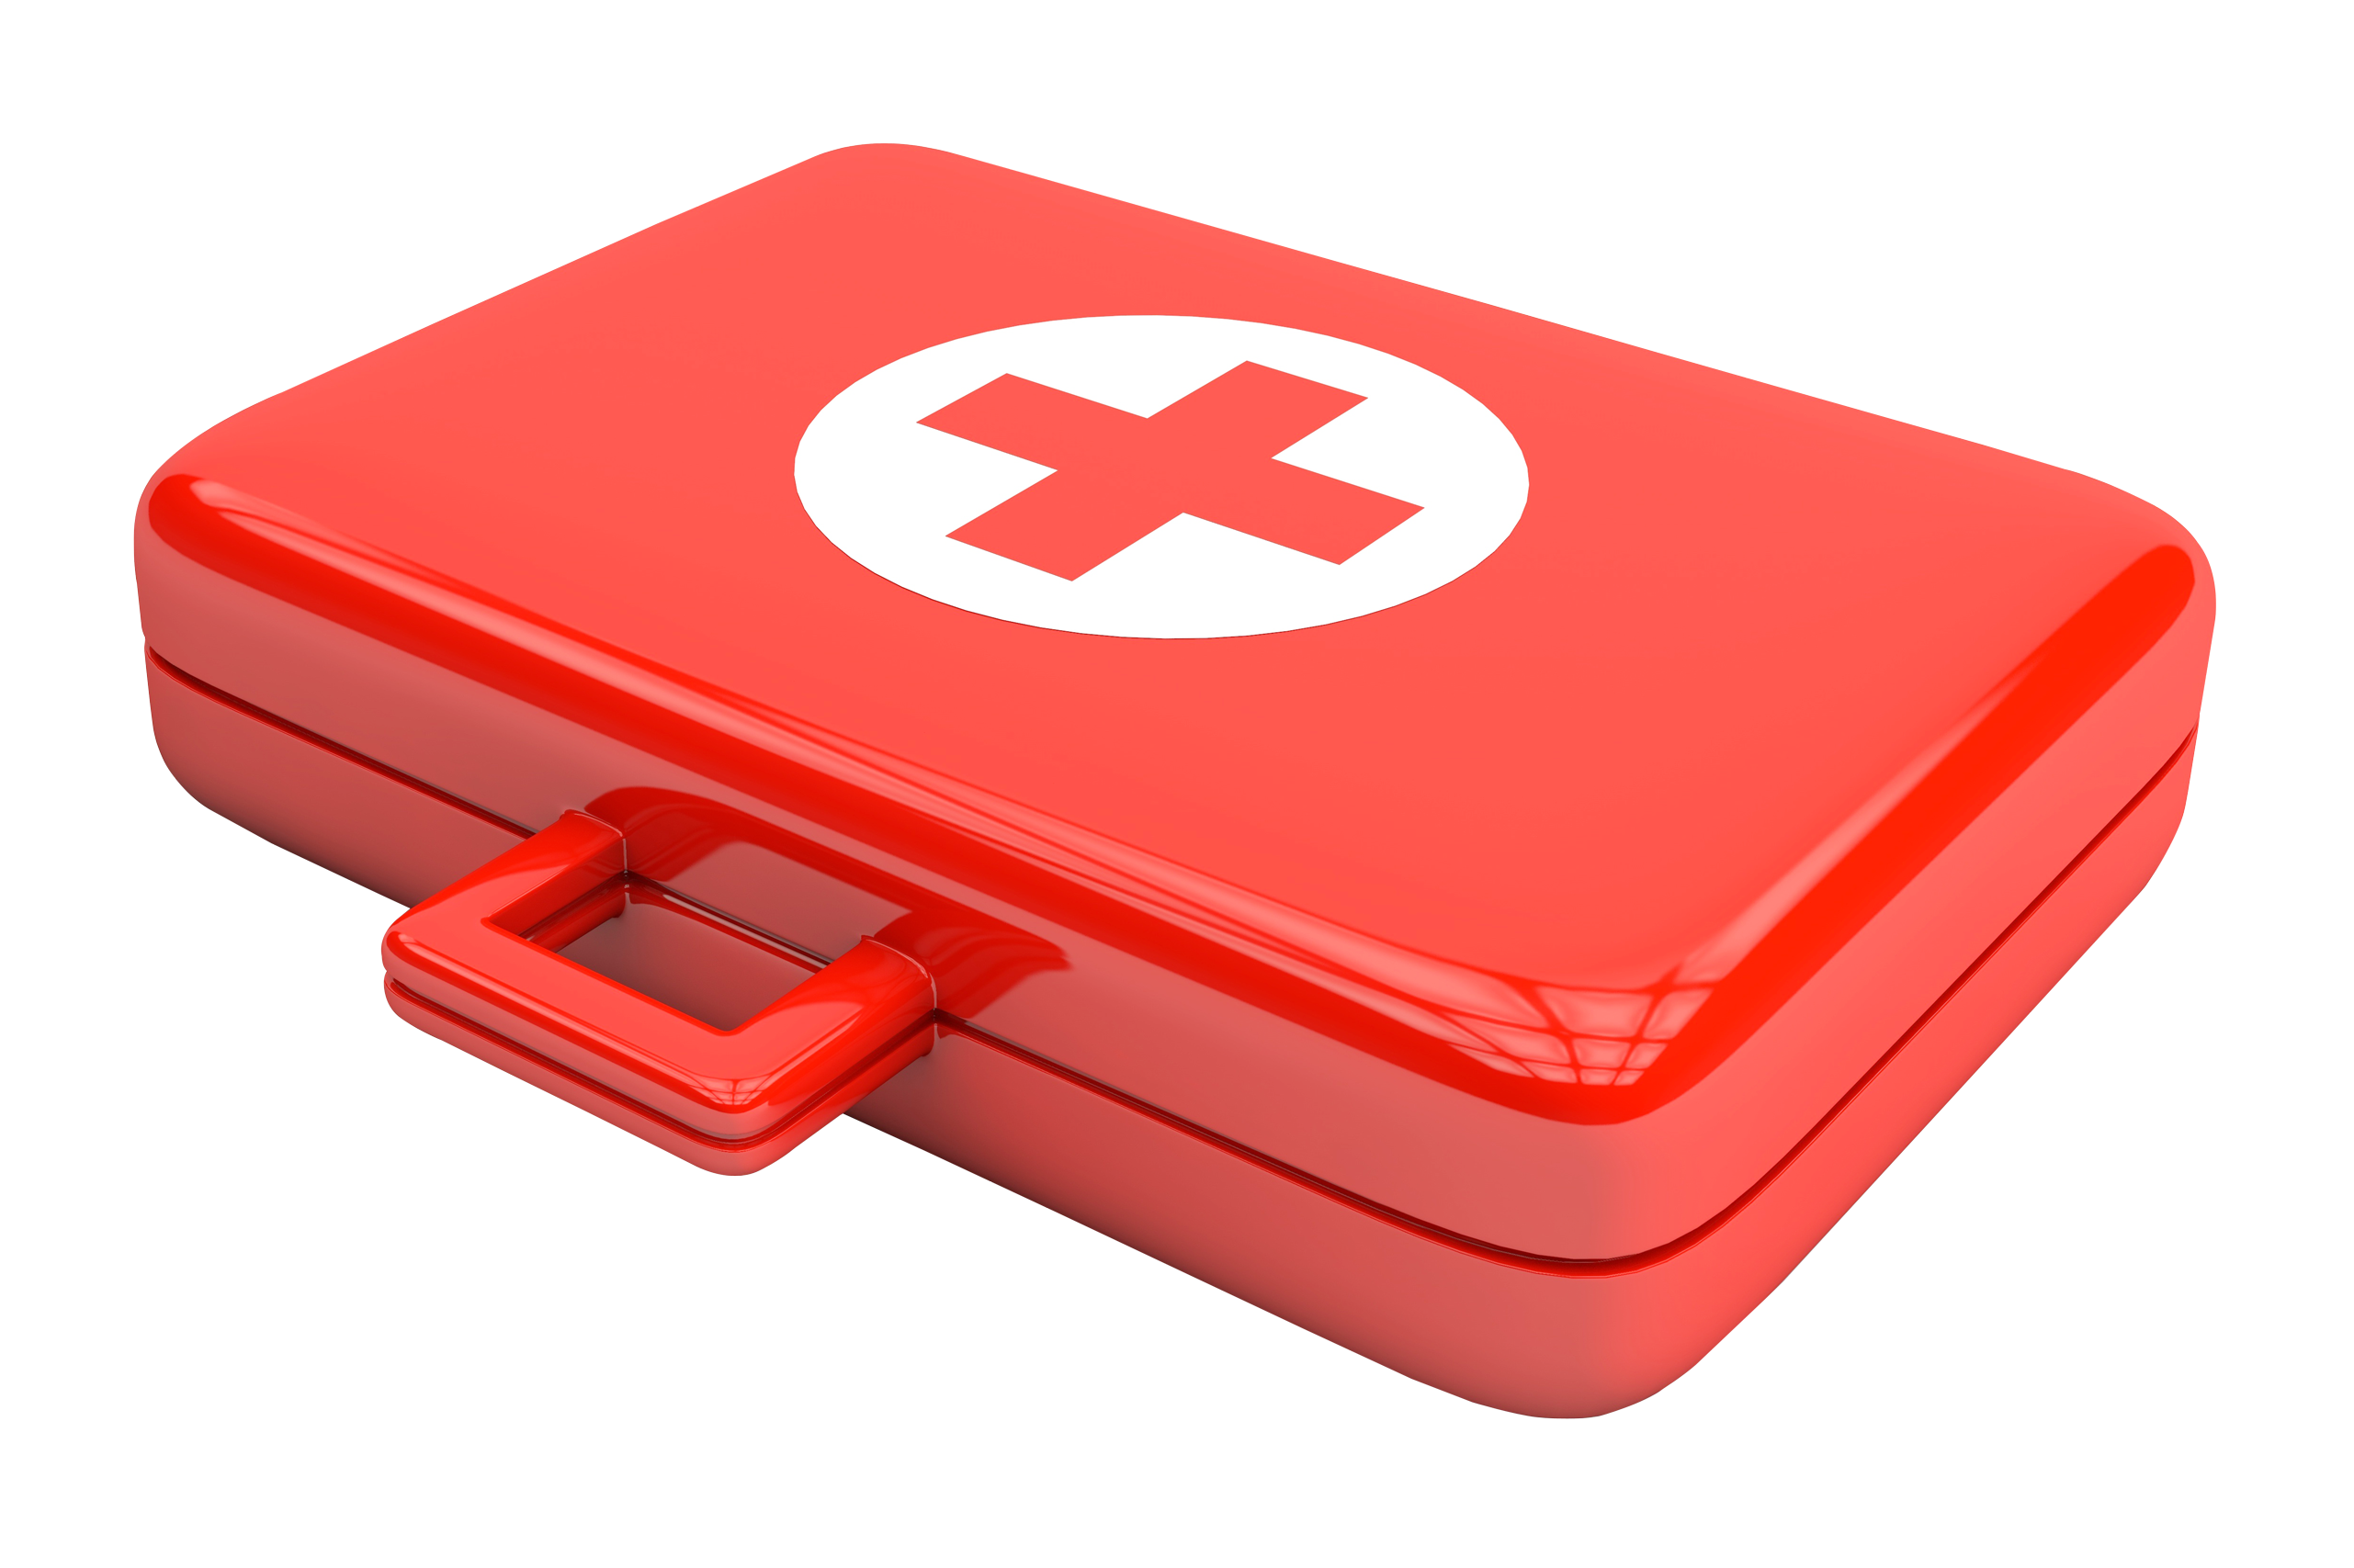 First Aid Kit Hd Png Image - First Aid Images, Transparent background PNG HD thumbnail